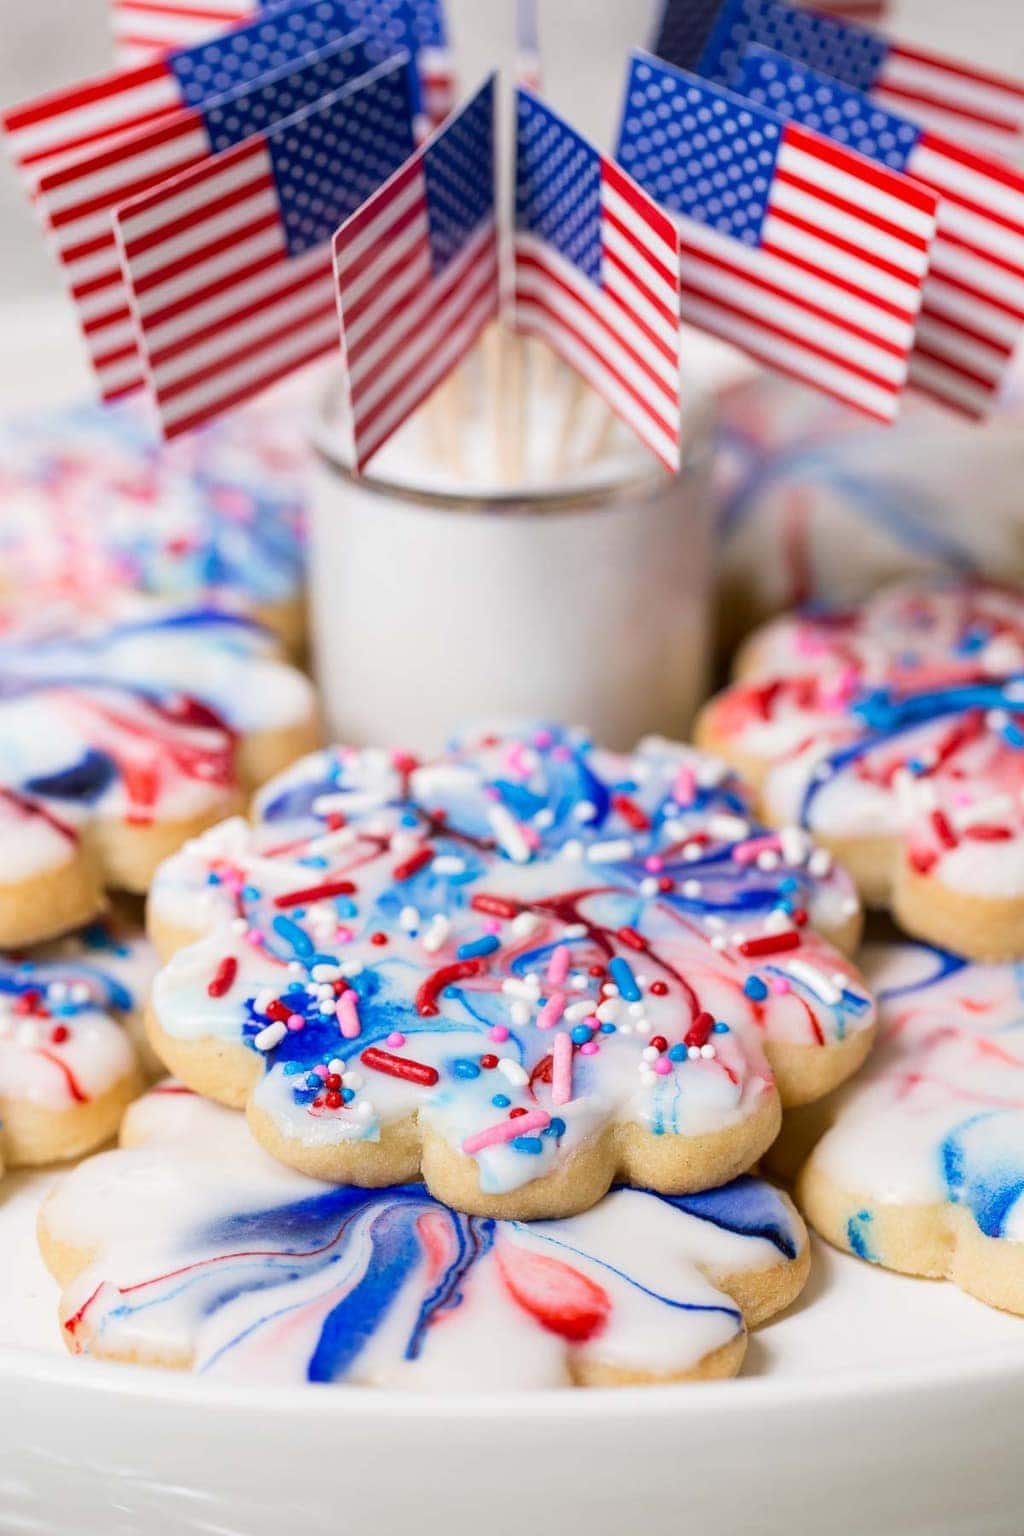 Vertical closeup photo of Red, White, and Blue Glazed Shortbread Cookies with American Flags in the background.